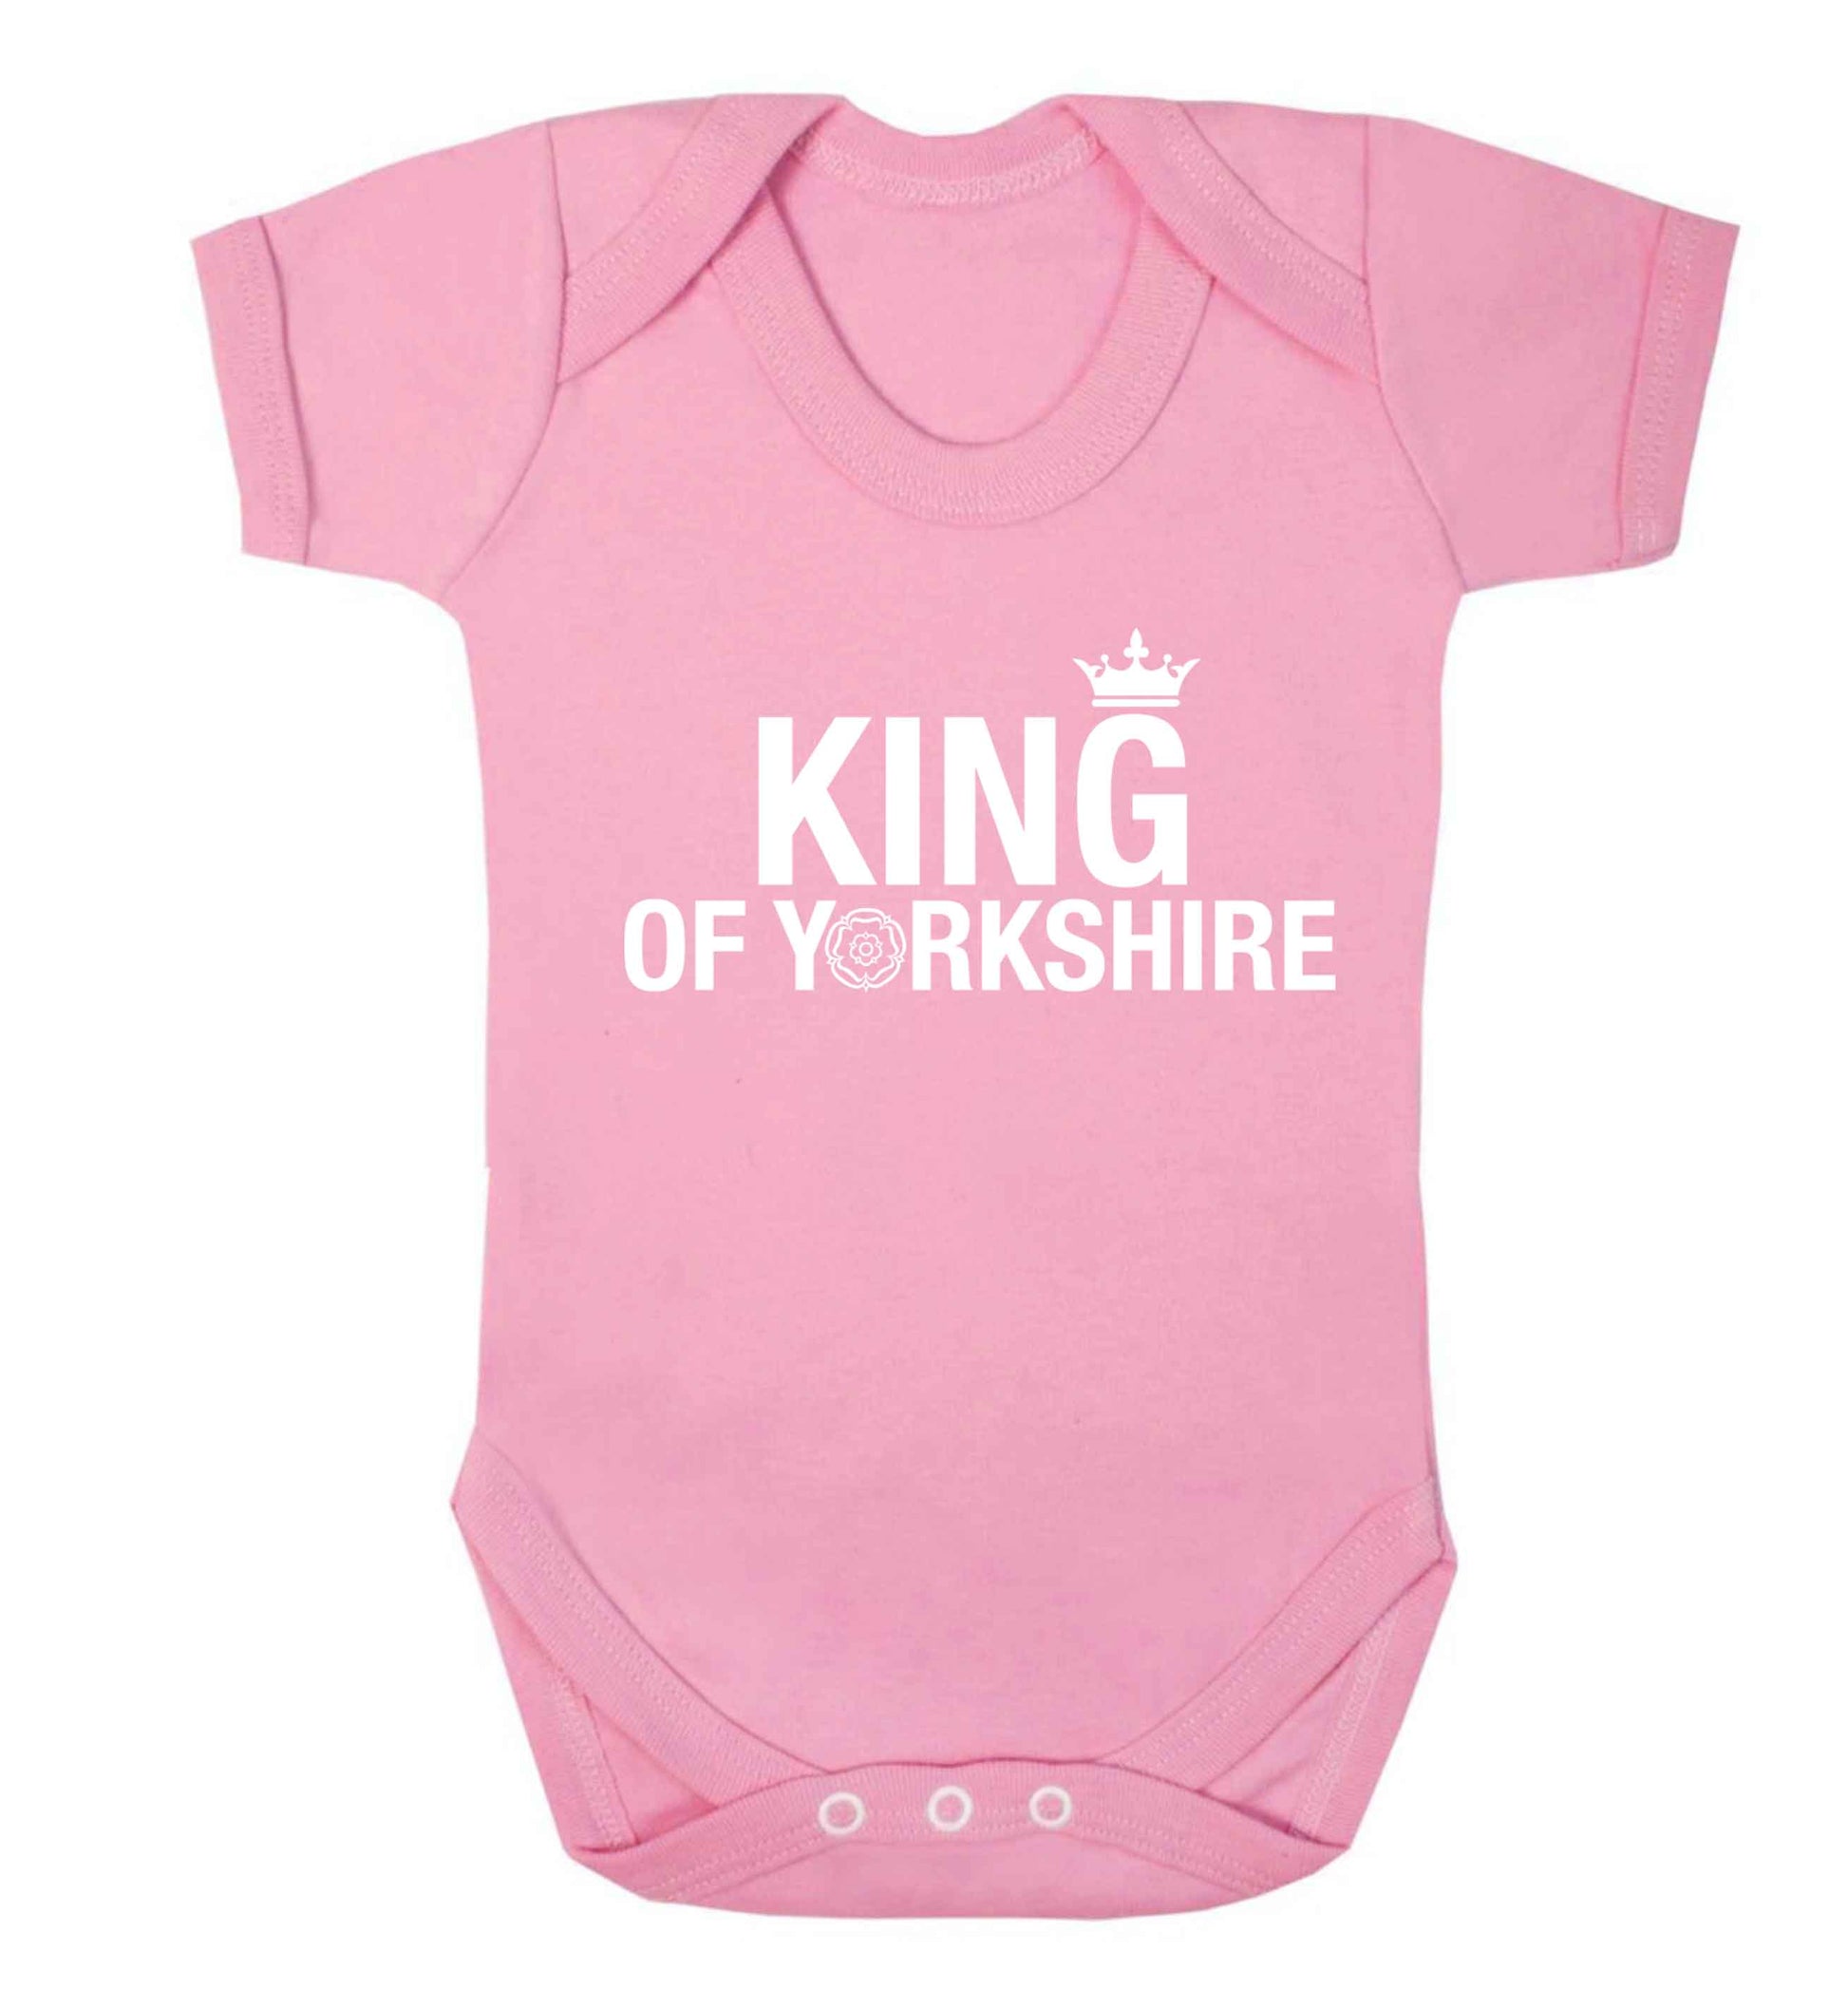 King of Yorkshire Baby Vest pale pink 18-24 months